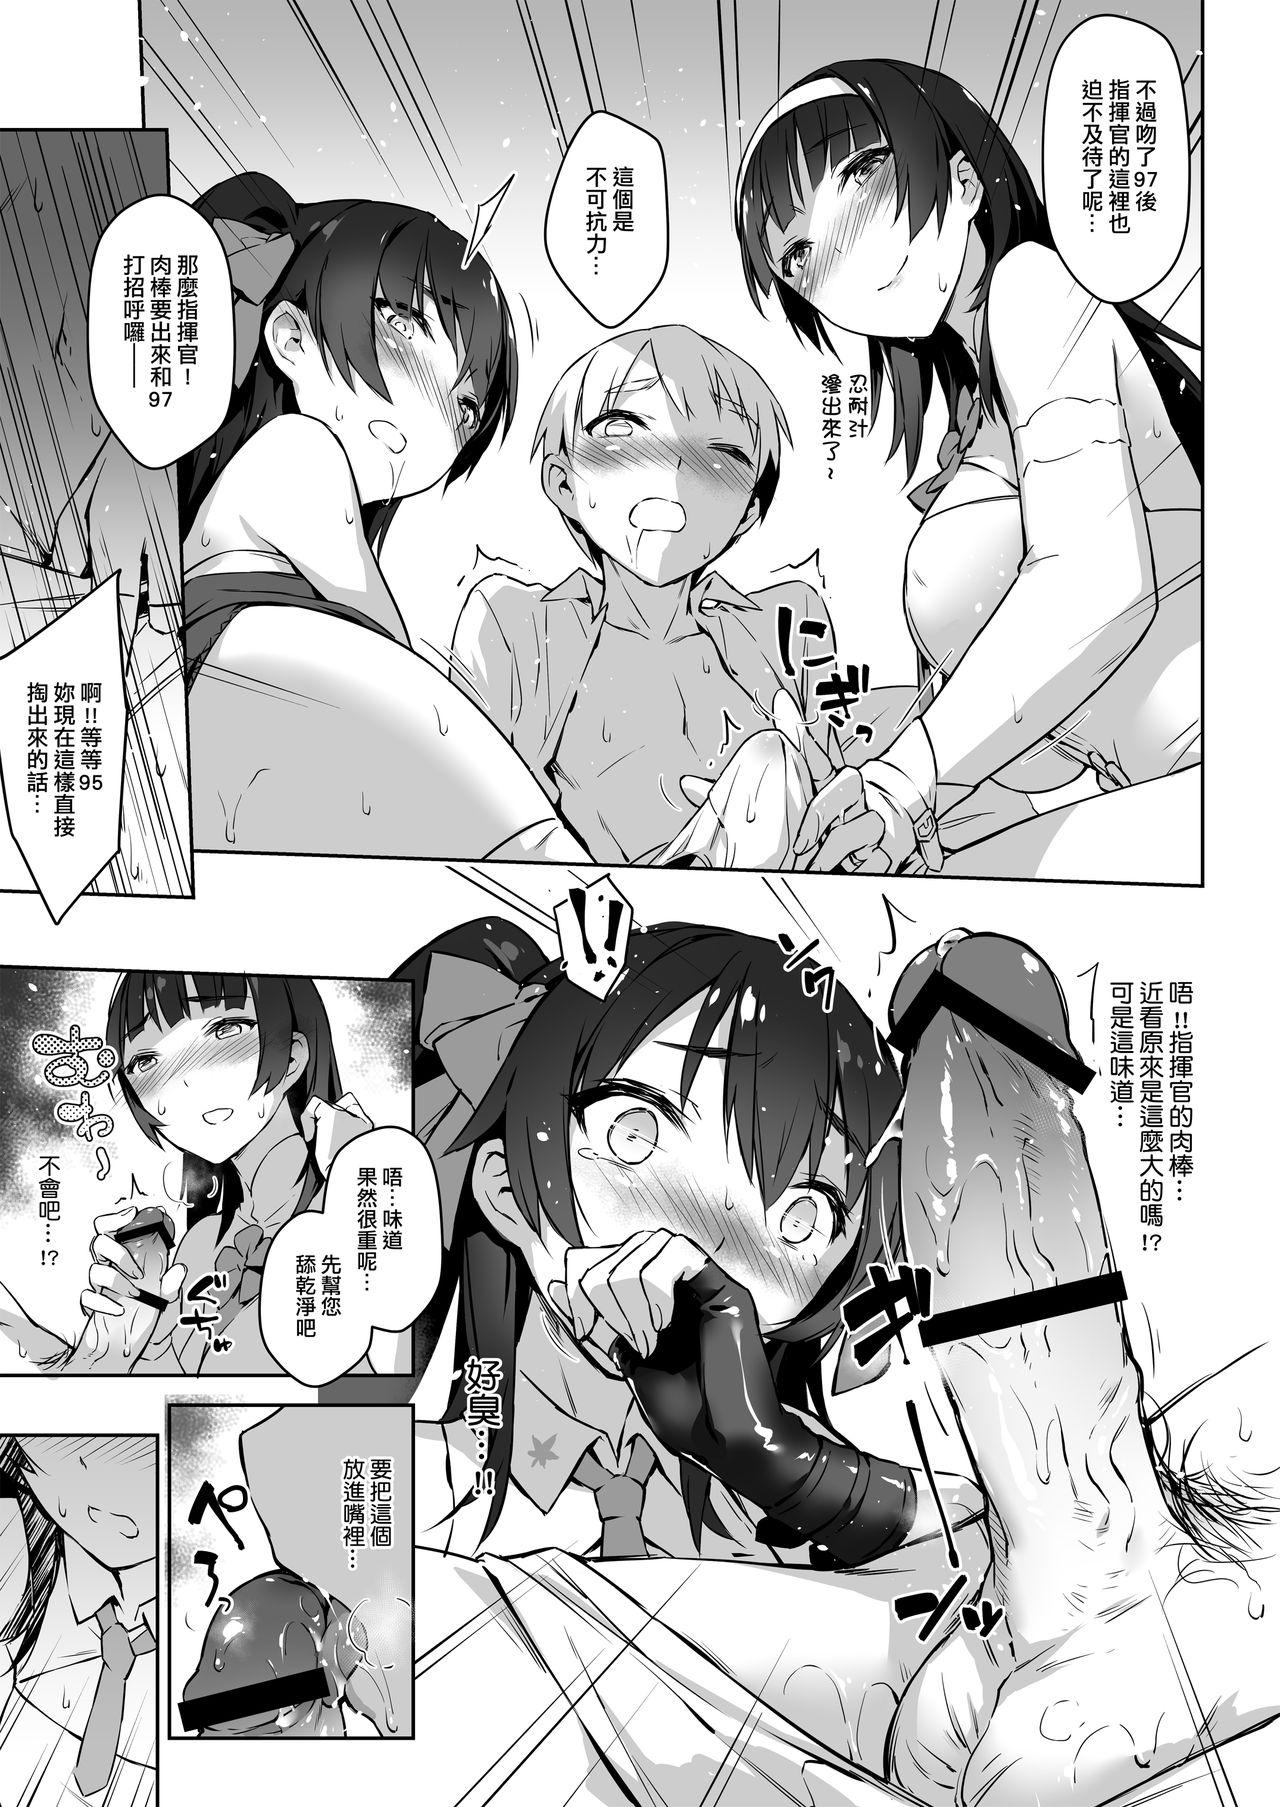 Family Porn Type 95 Type 97, Let Sister Teaches You!! - Girls frontline Hot Naked Girl - Page 11